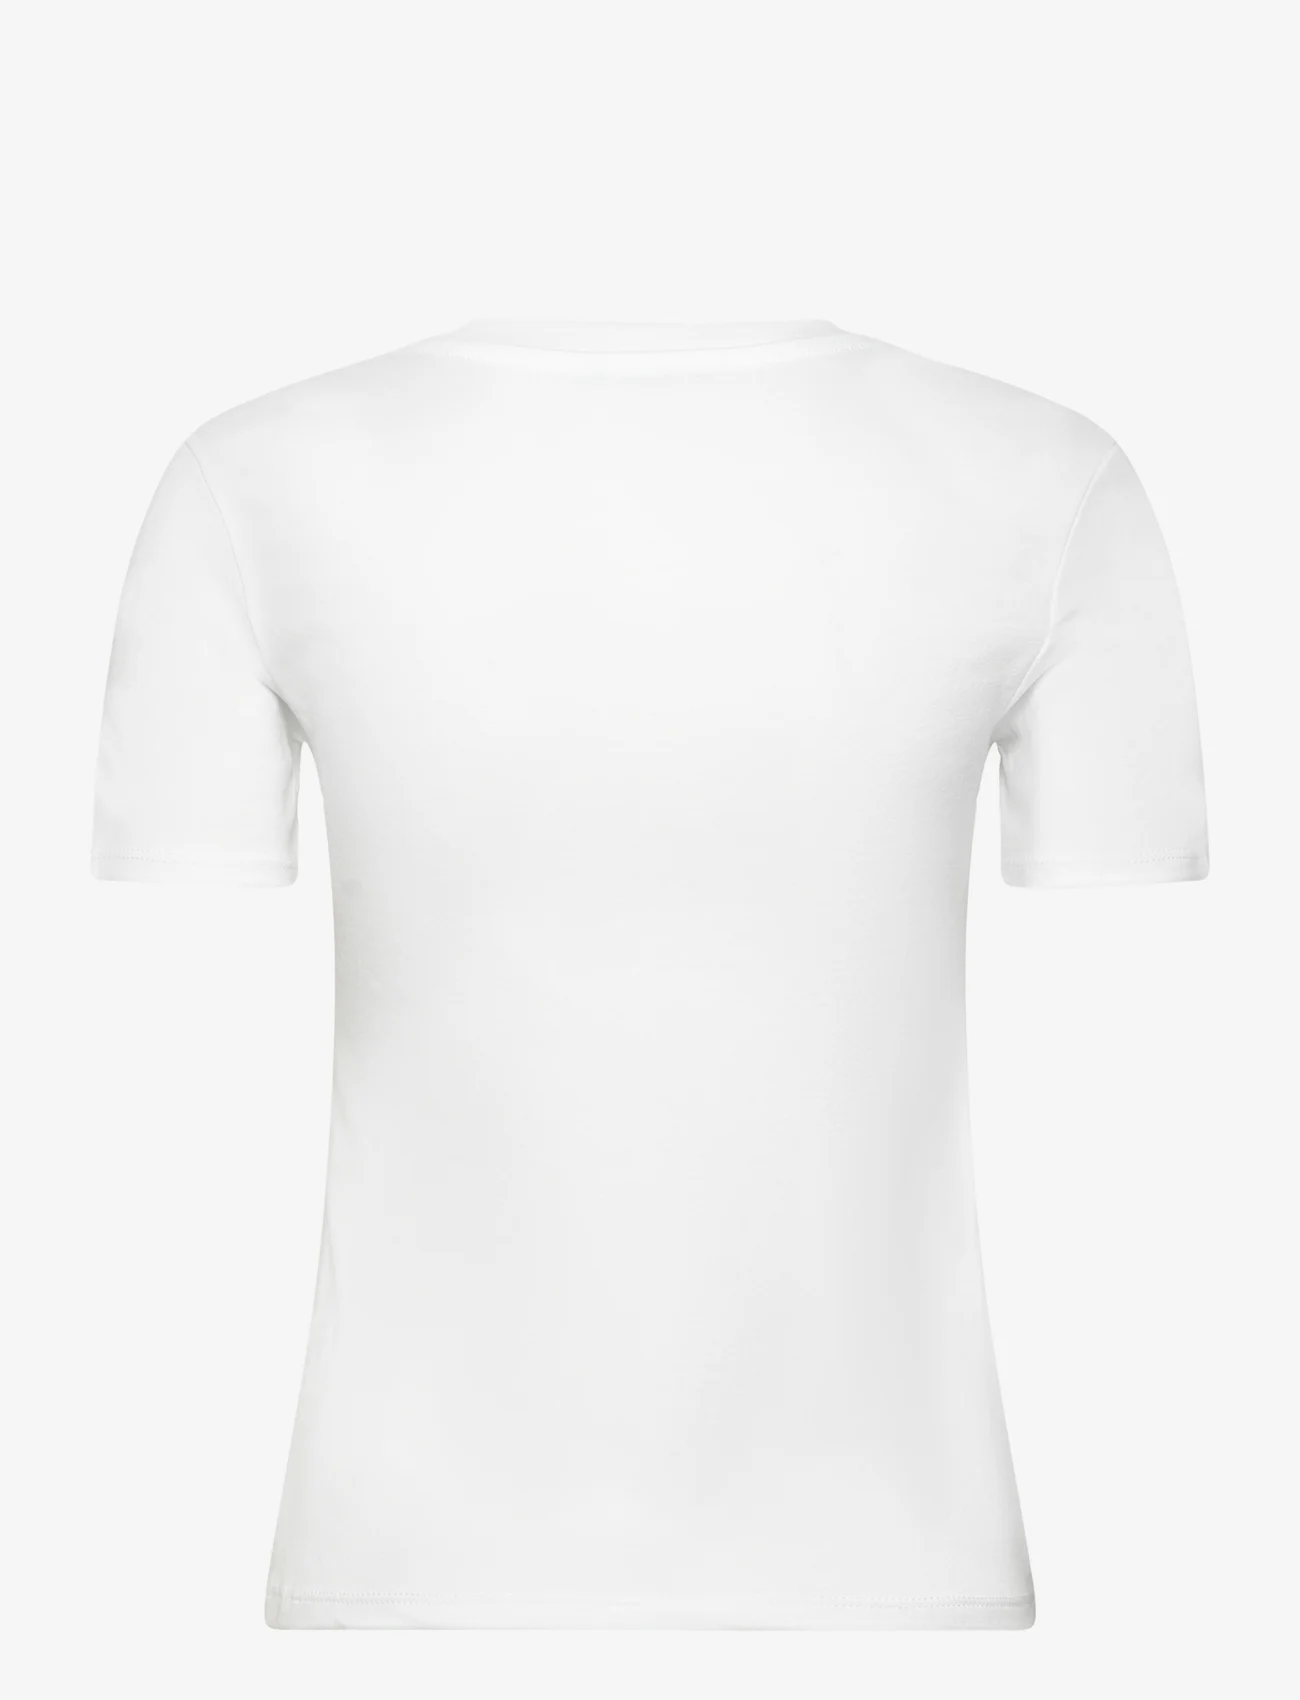 United Colors of Benetton - T-SHIRT - t-shirts - white - 1